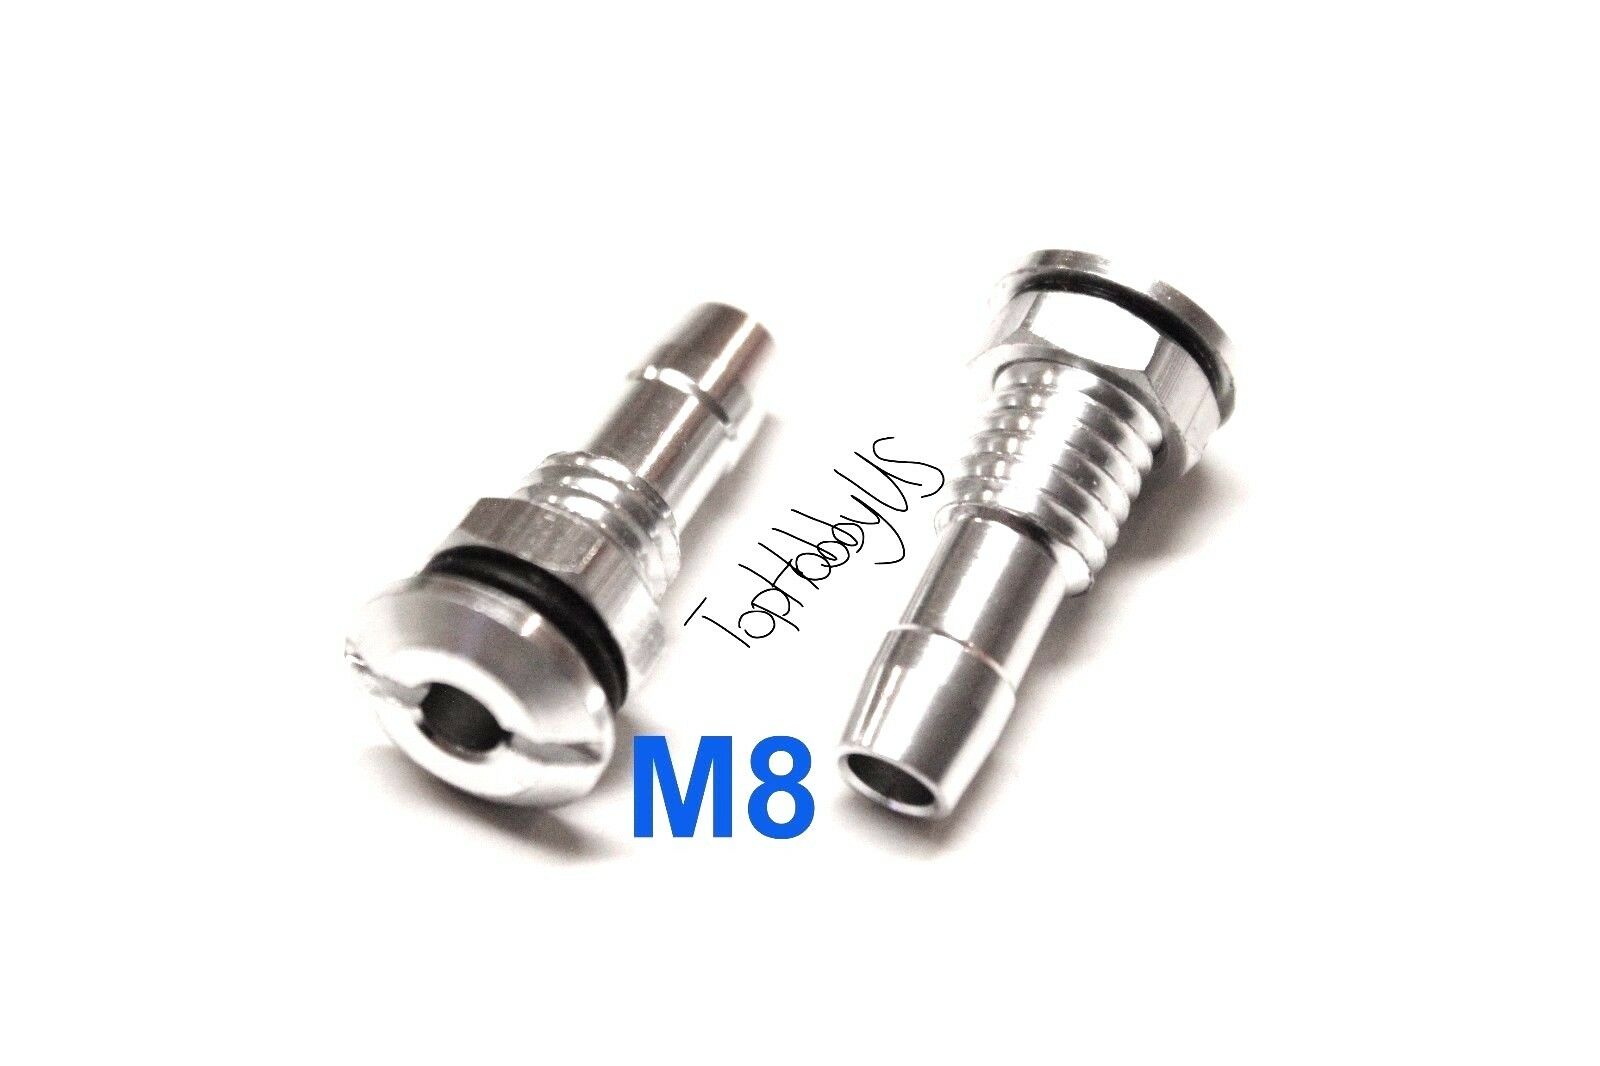 2pcs M8 1/3" Aluminum Bulkhead Water Outlet Connector Rc Boat Model Us Sell Ship